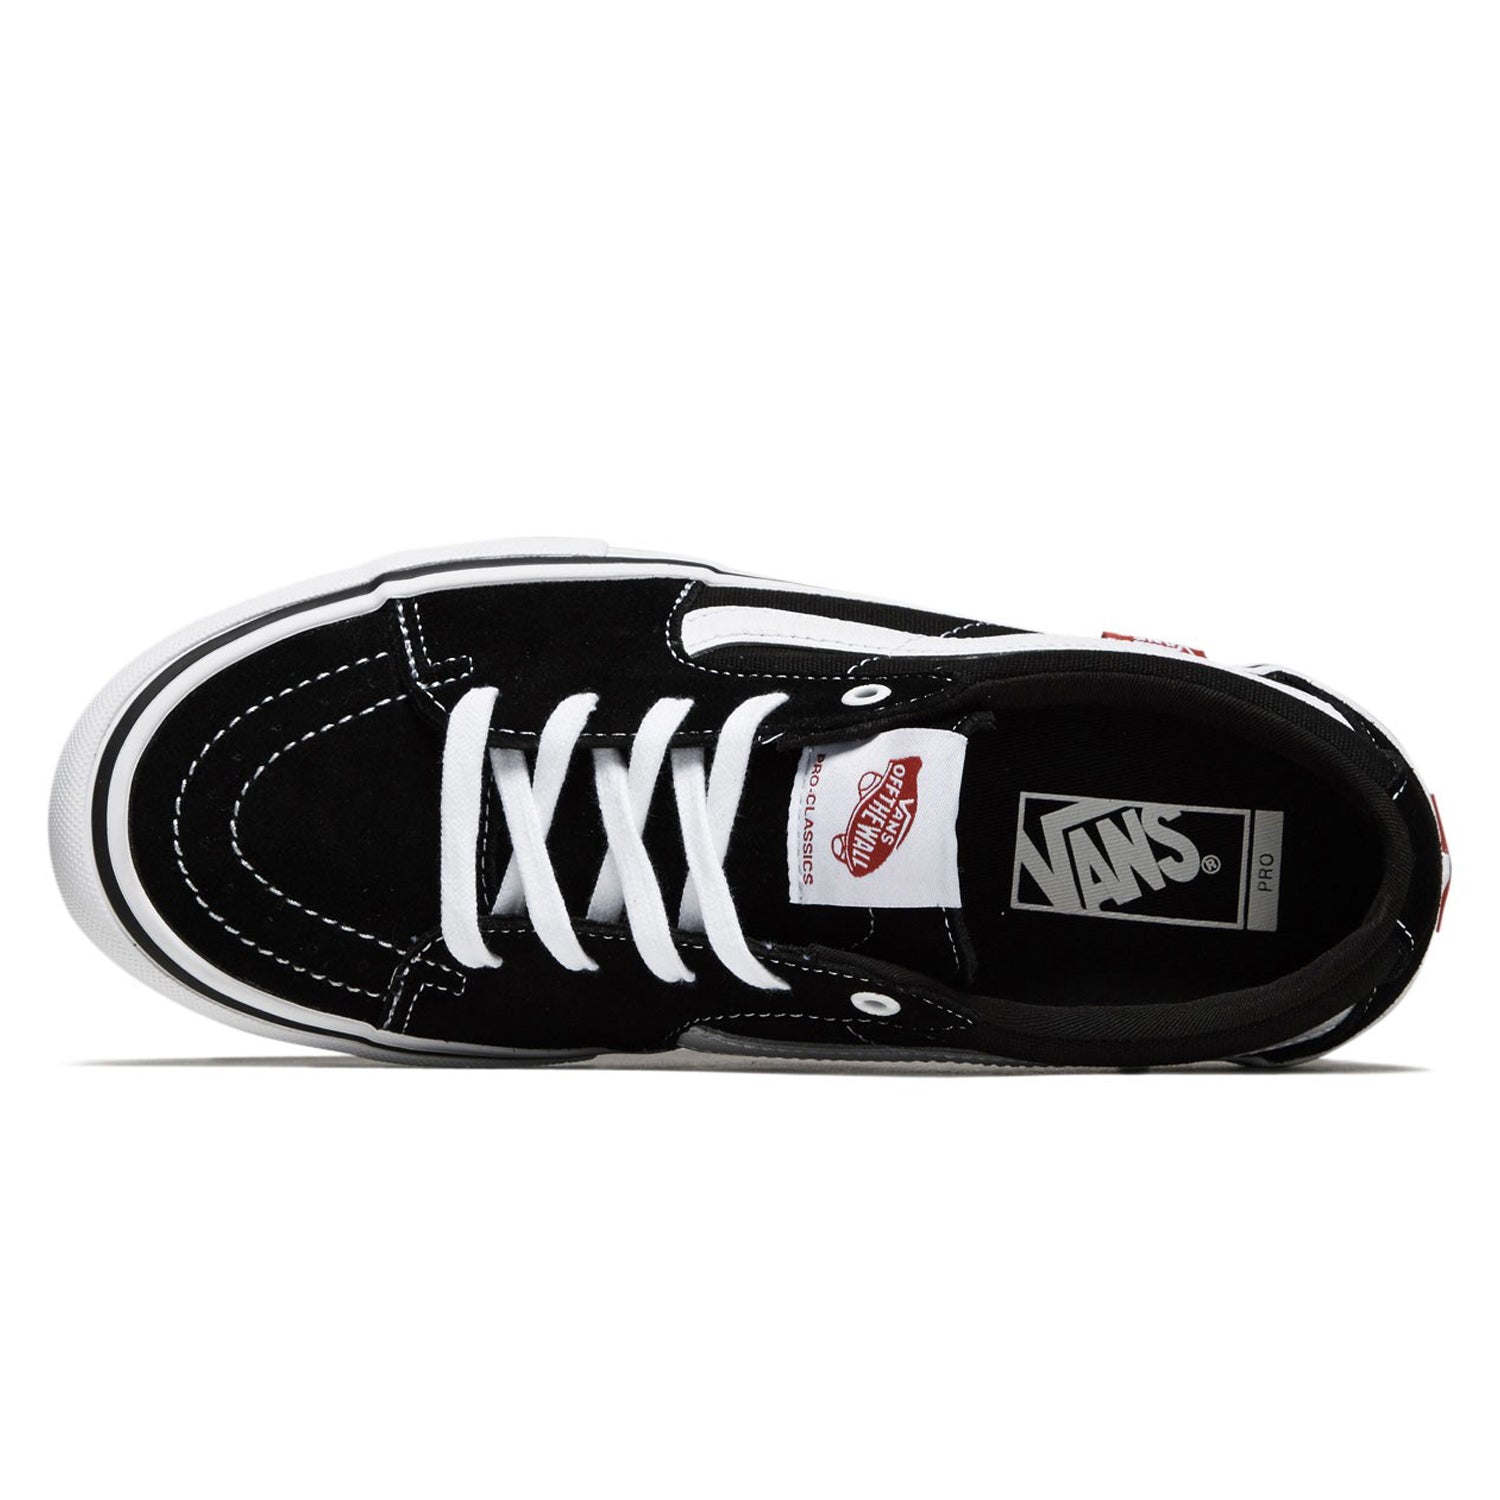 vans low black and white